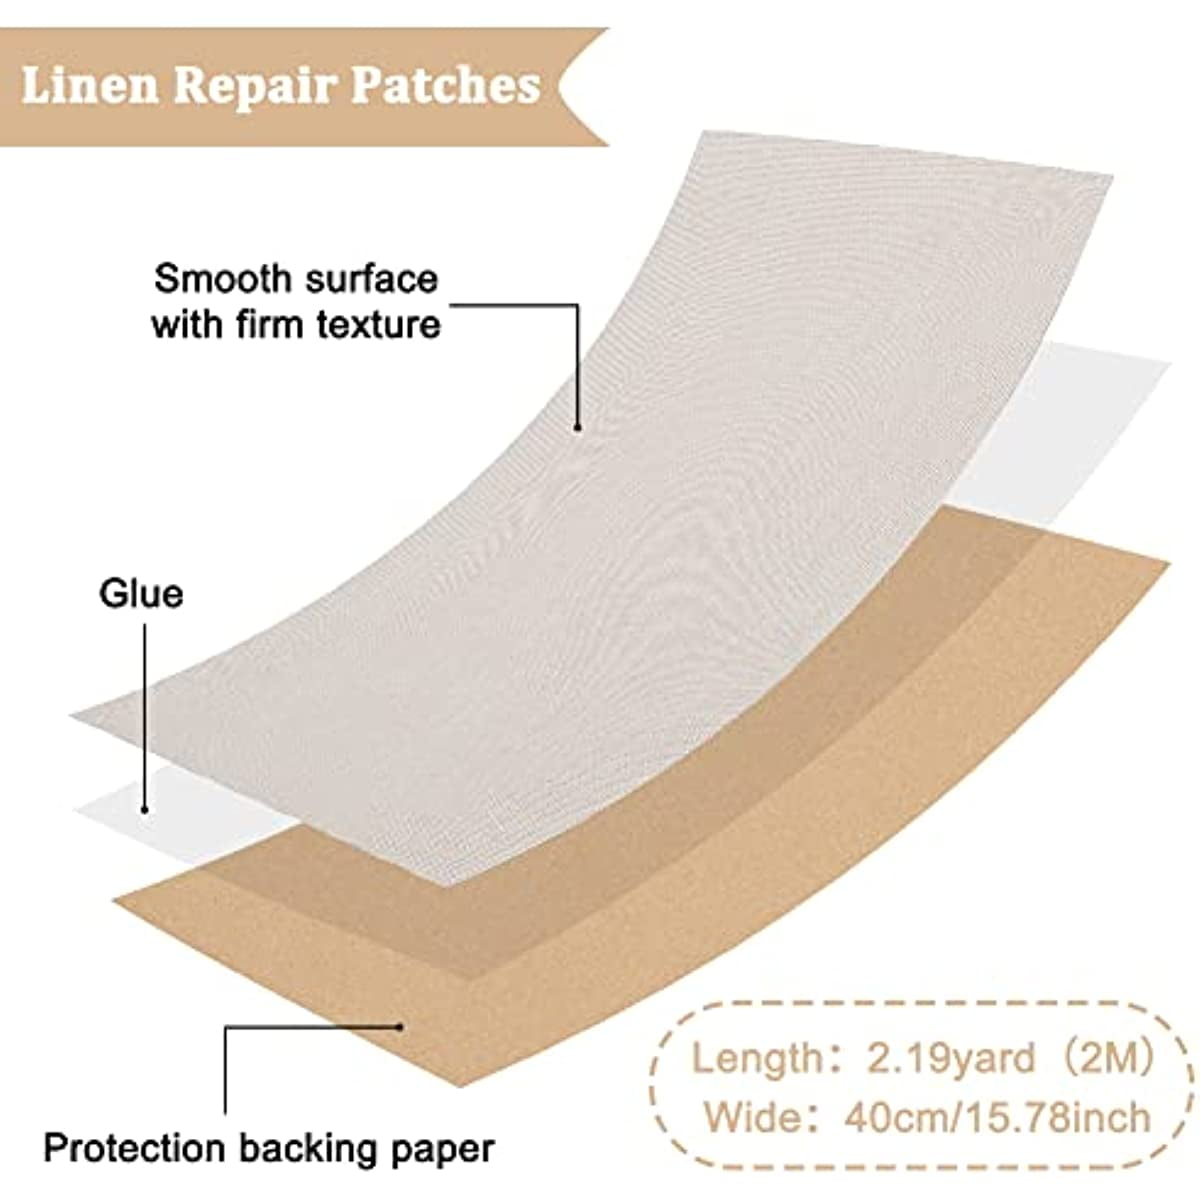  Fine Linen Repair Patches, Self-Adhesive Linen Fabric Adhesive,  8X11 inch Extra Size, Multi Color, Can be Used for Linen Sofa Repair,Throw  Pillows,All Linen Fabric Items Repair.(Platinum Gray)